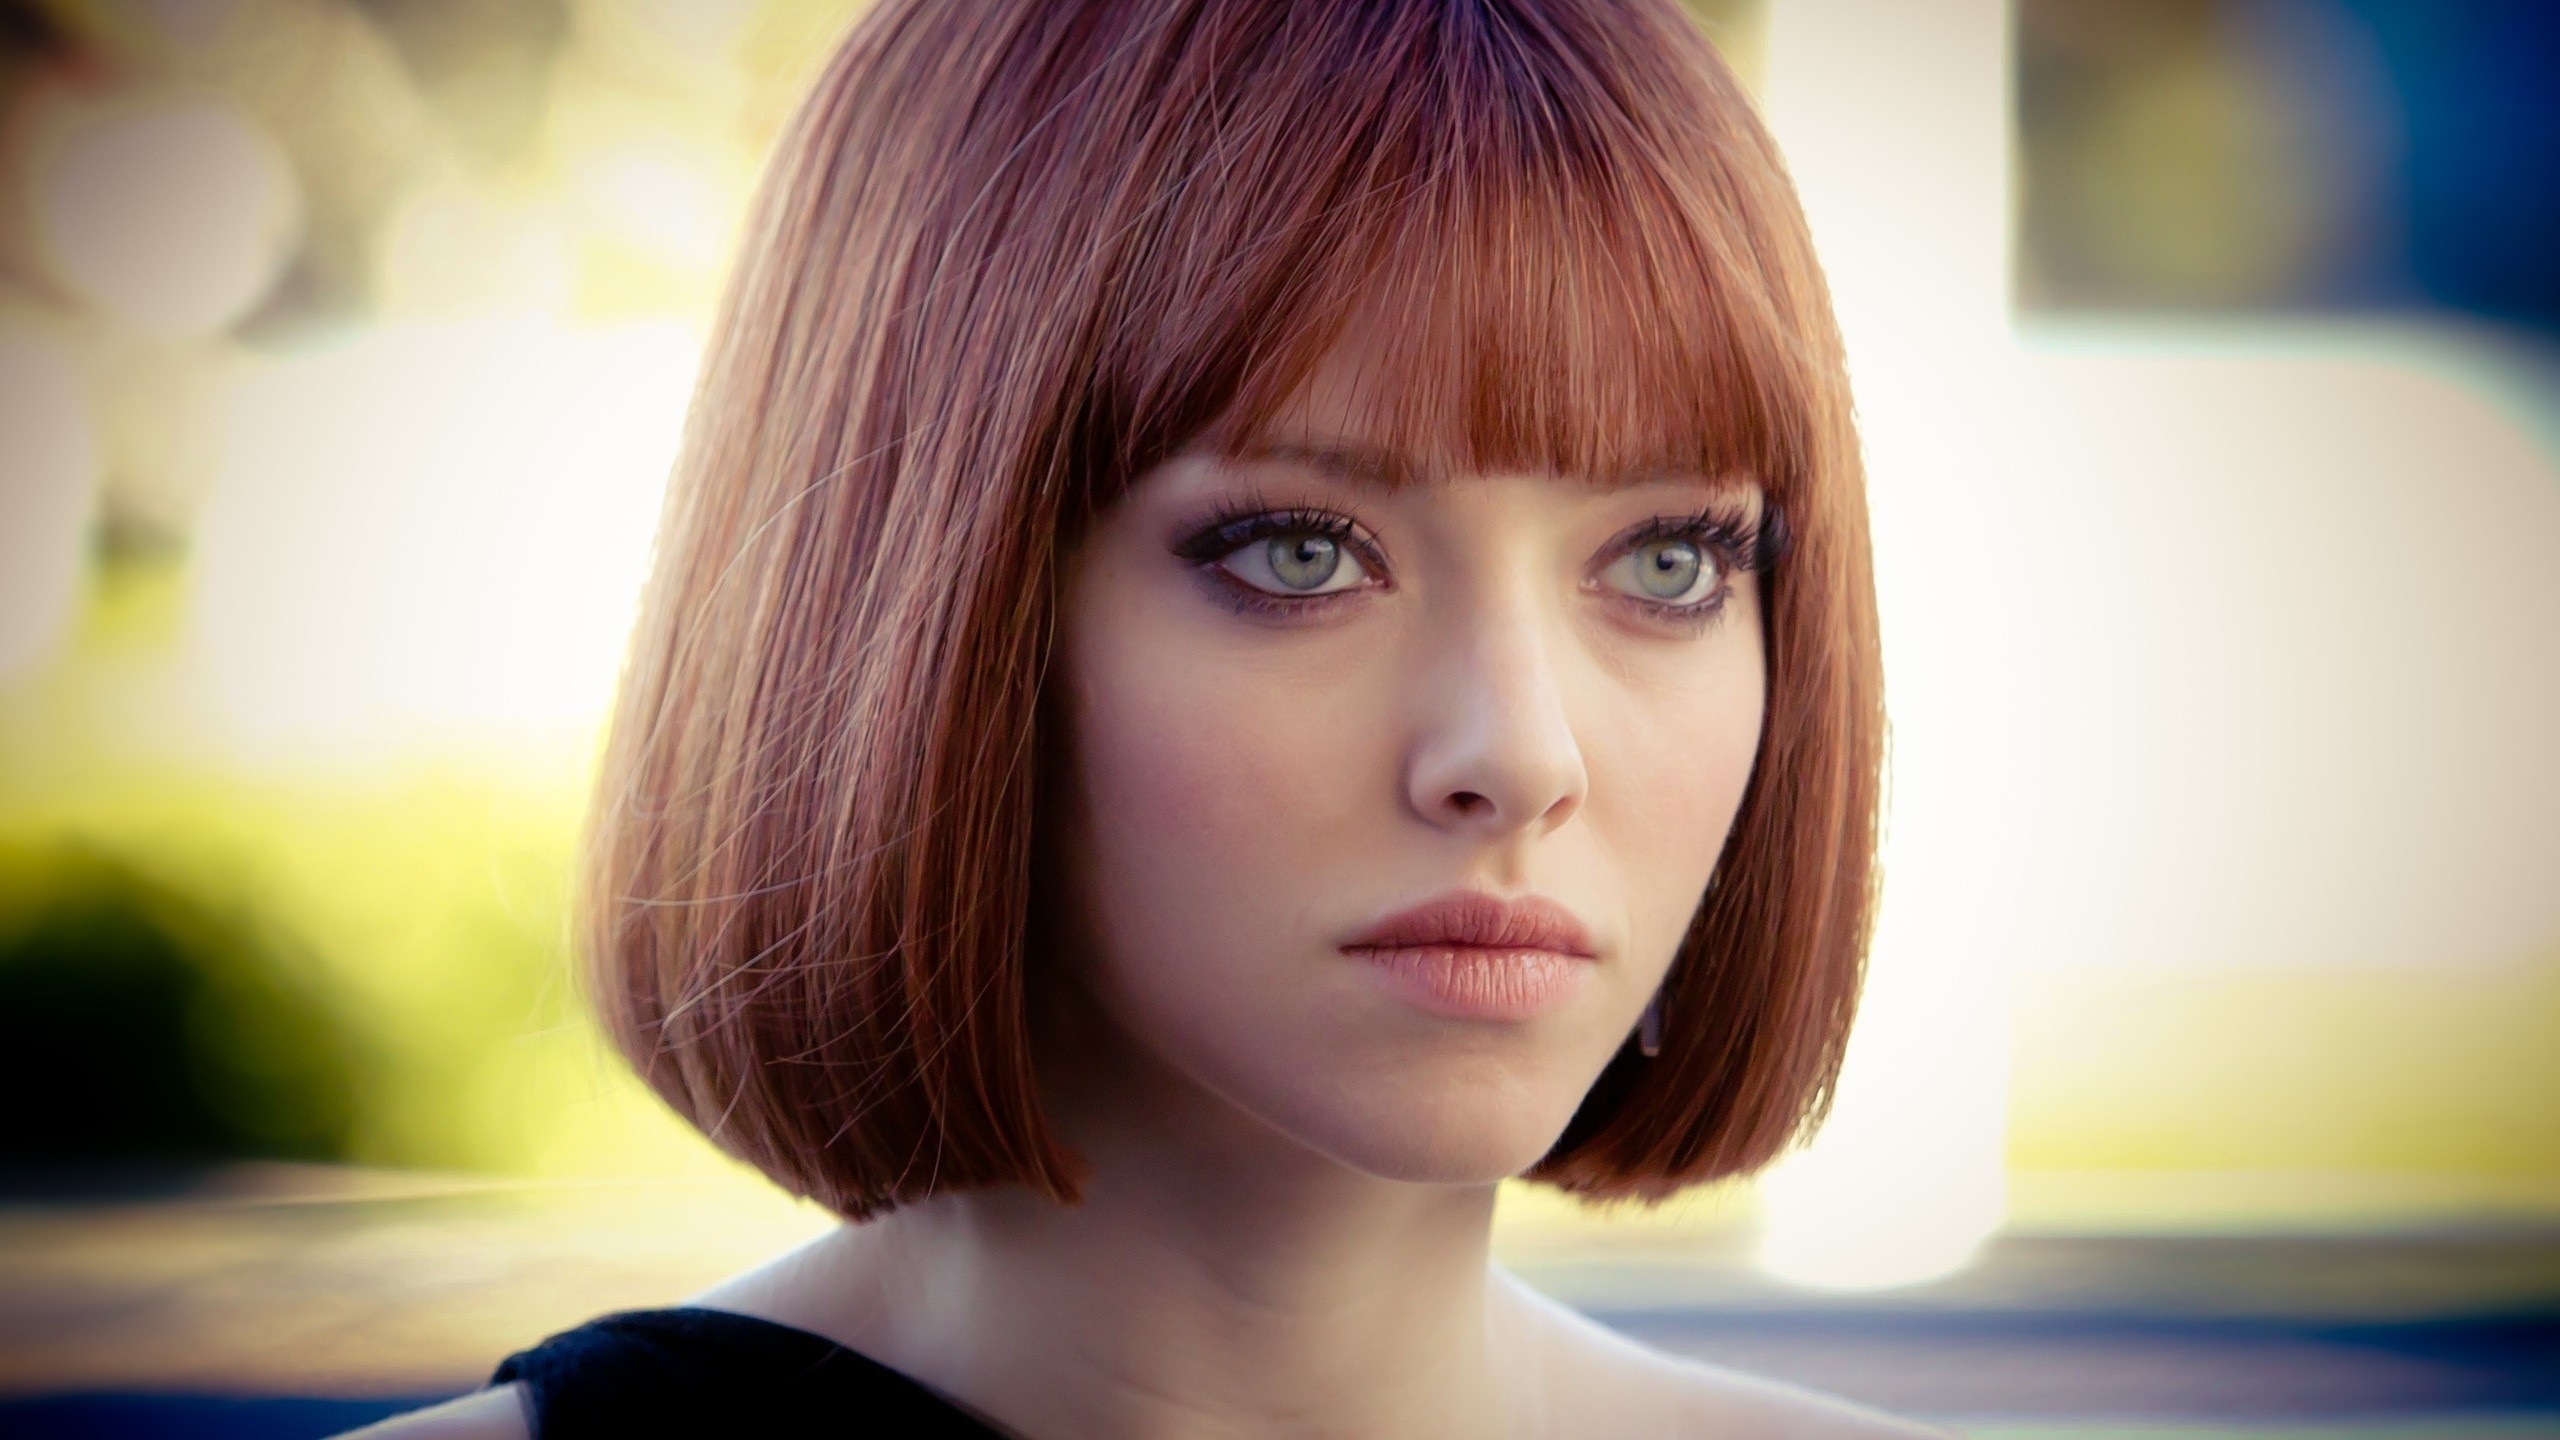 Amanda Seyfried In Time for 2560x1440 HDTV resolution